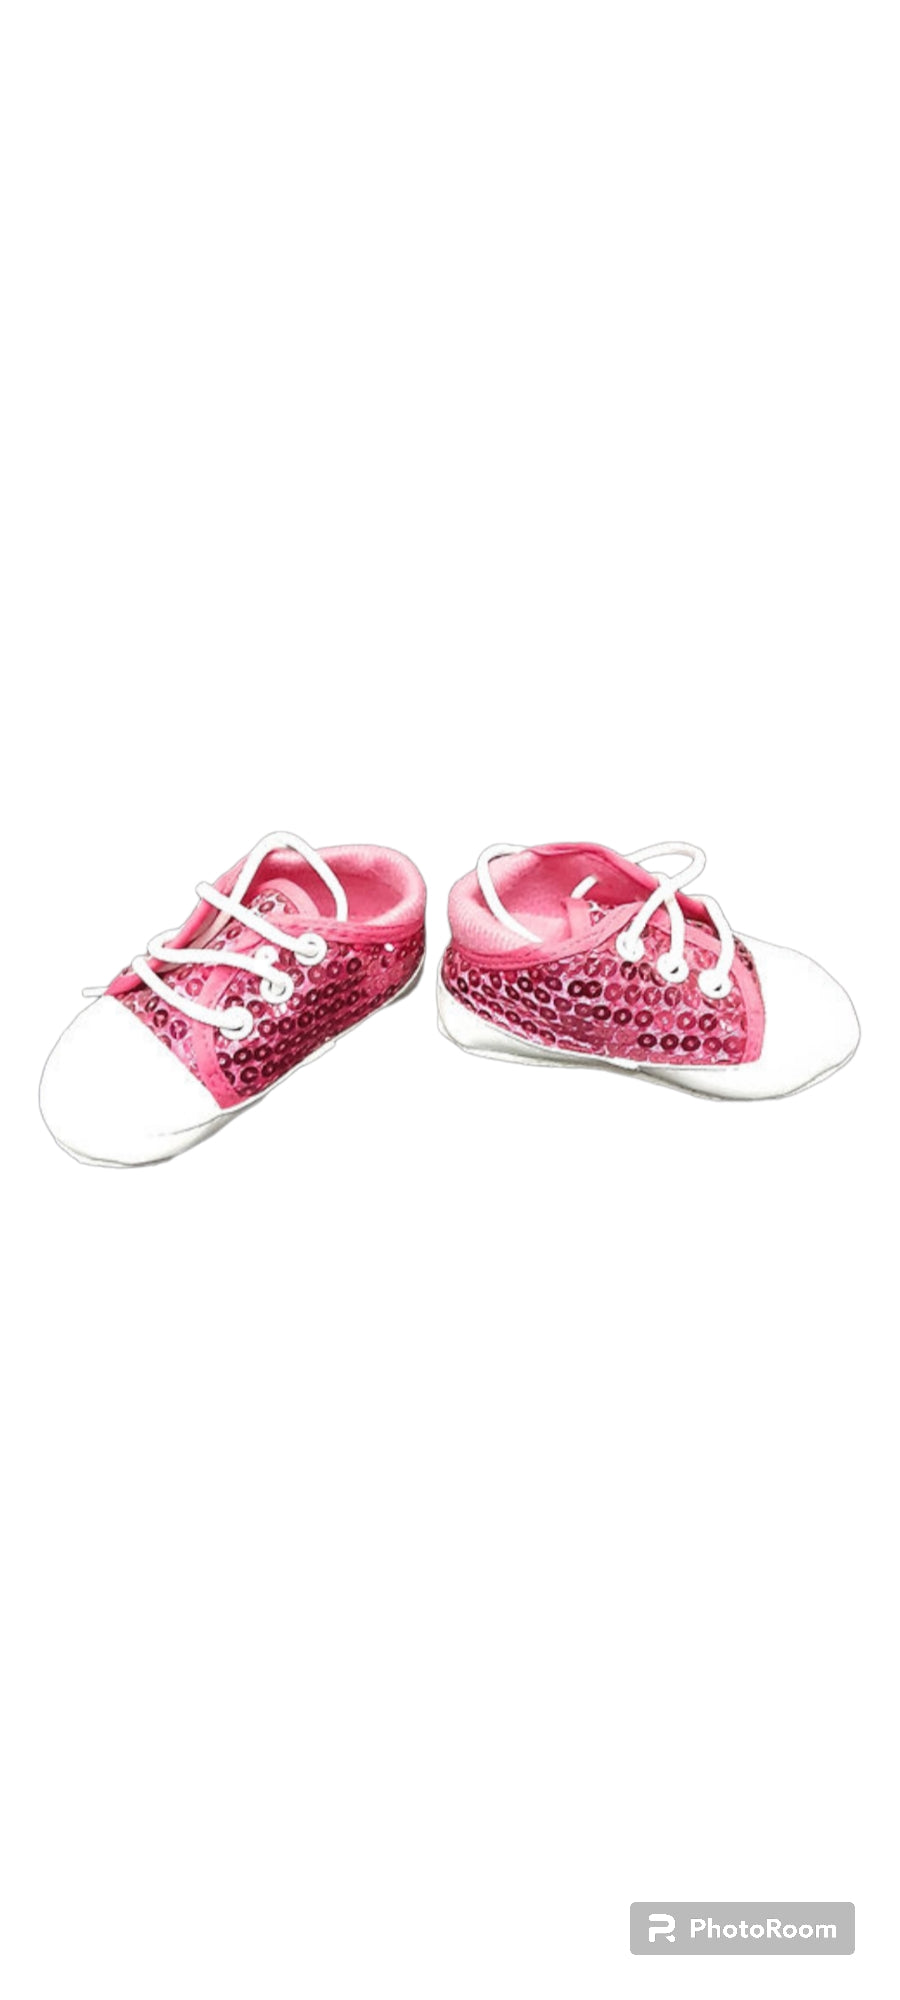 Pink sequin baby shoes